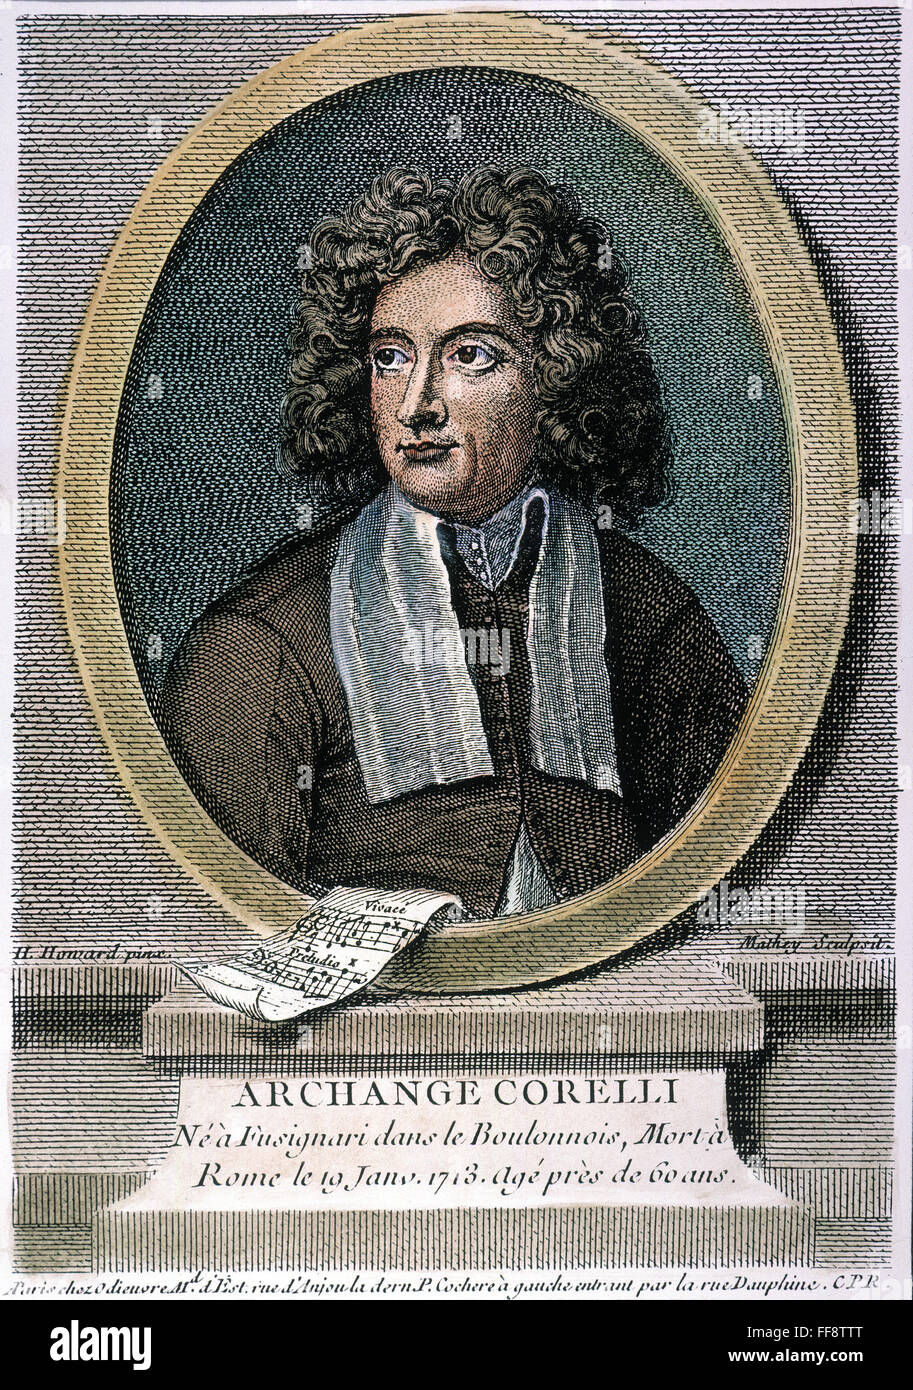 ARCANGELO CORELLI /n(1653-1713). Italian violinist and composer: French engraving, 18th century. Stock Photo